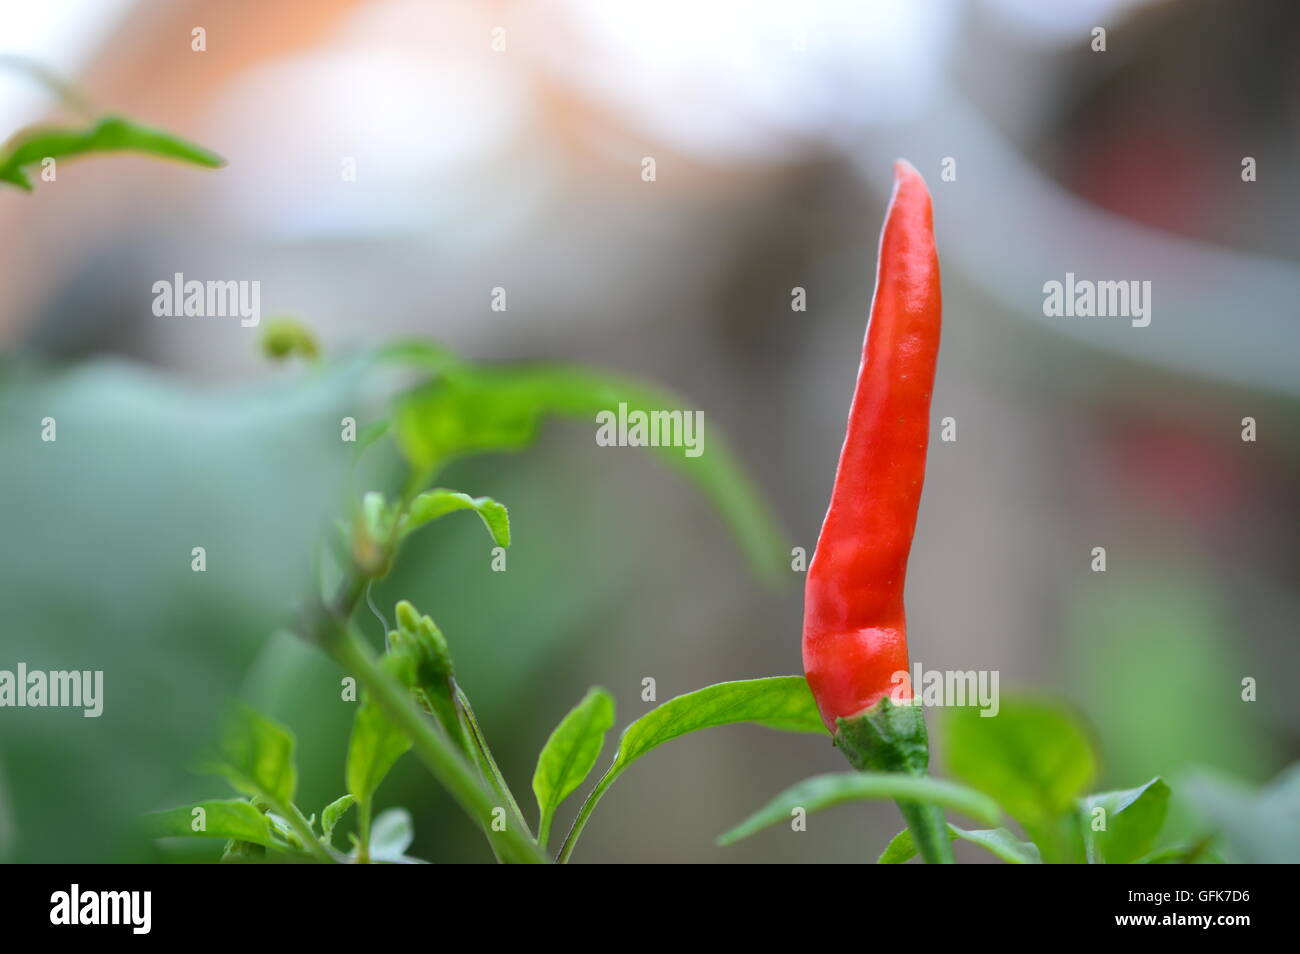 closed-up red chili pepper selective focus Stock Photo